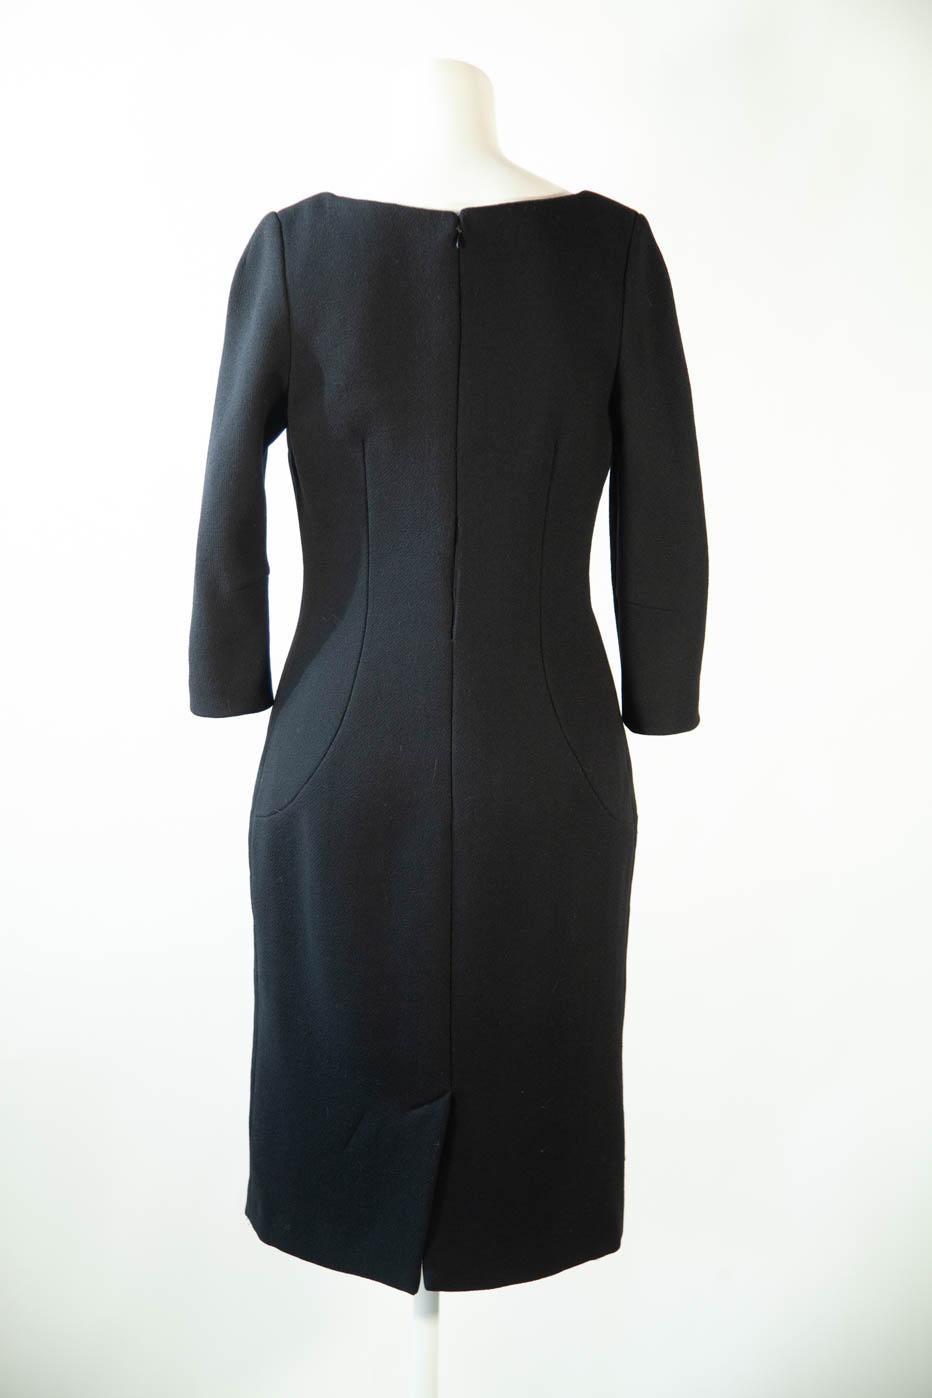 Dolce and Gabbana black dress In Excellent Condition For Sale In Kingston, NY